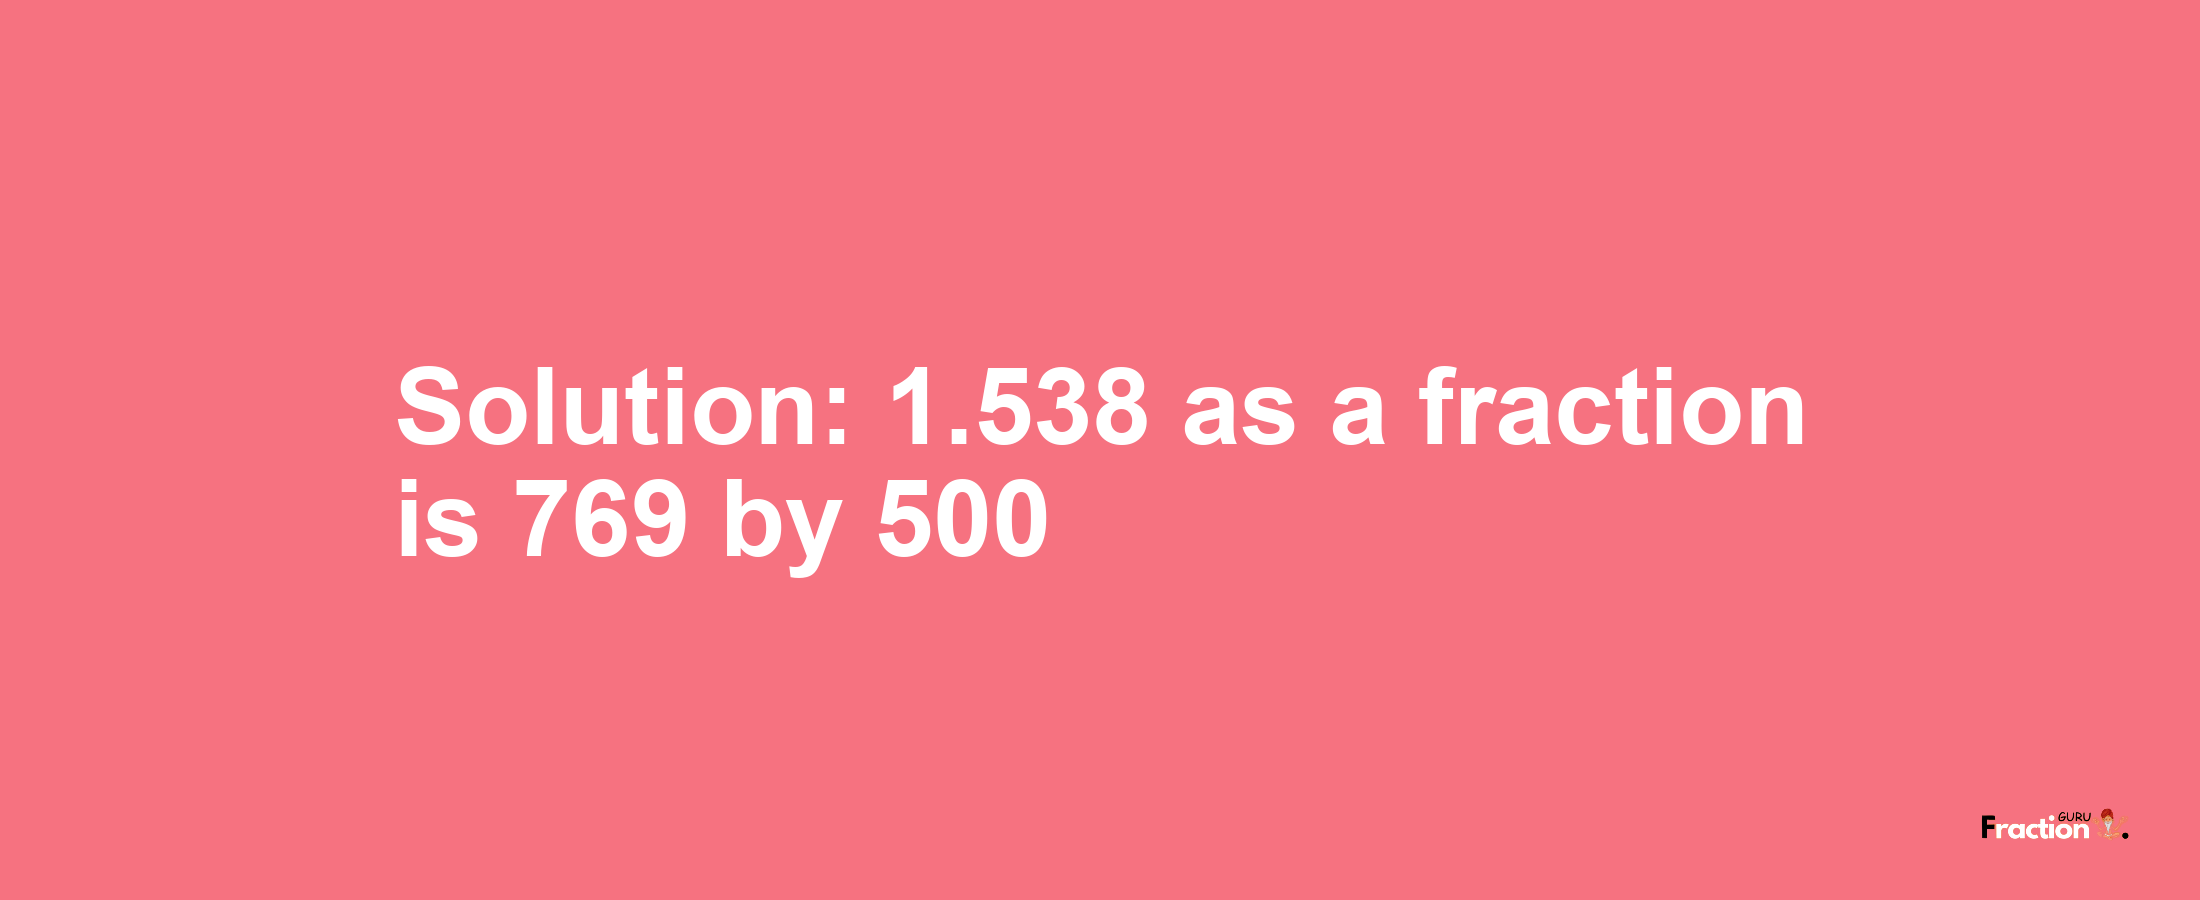 Solution:1.538 as a fraction is 769/500